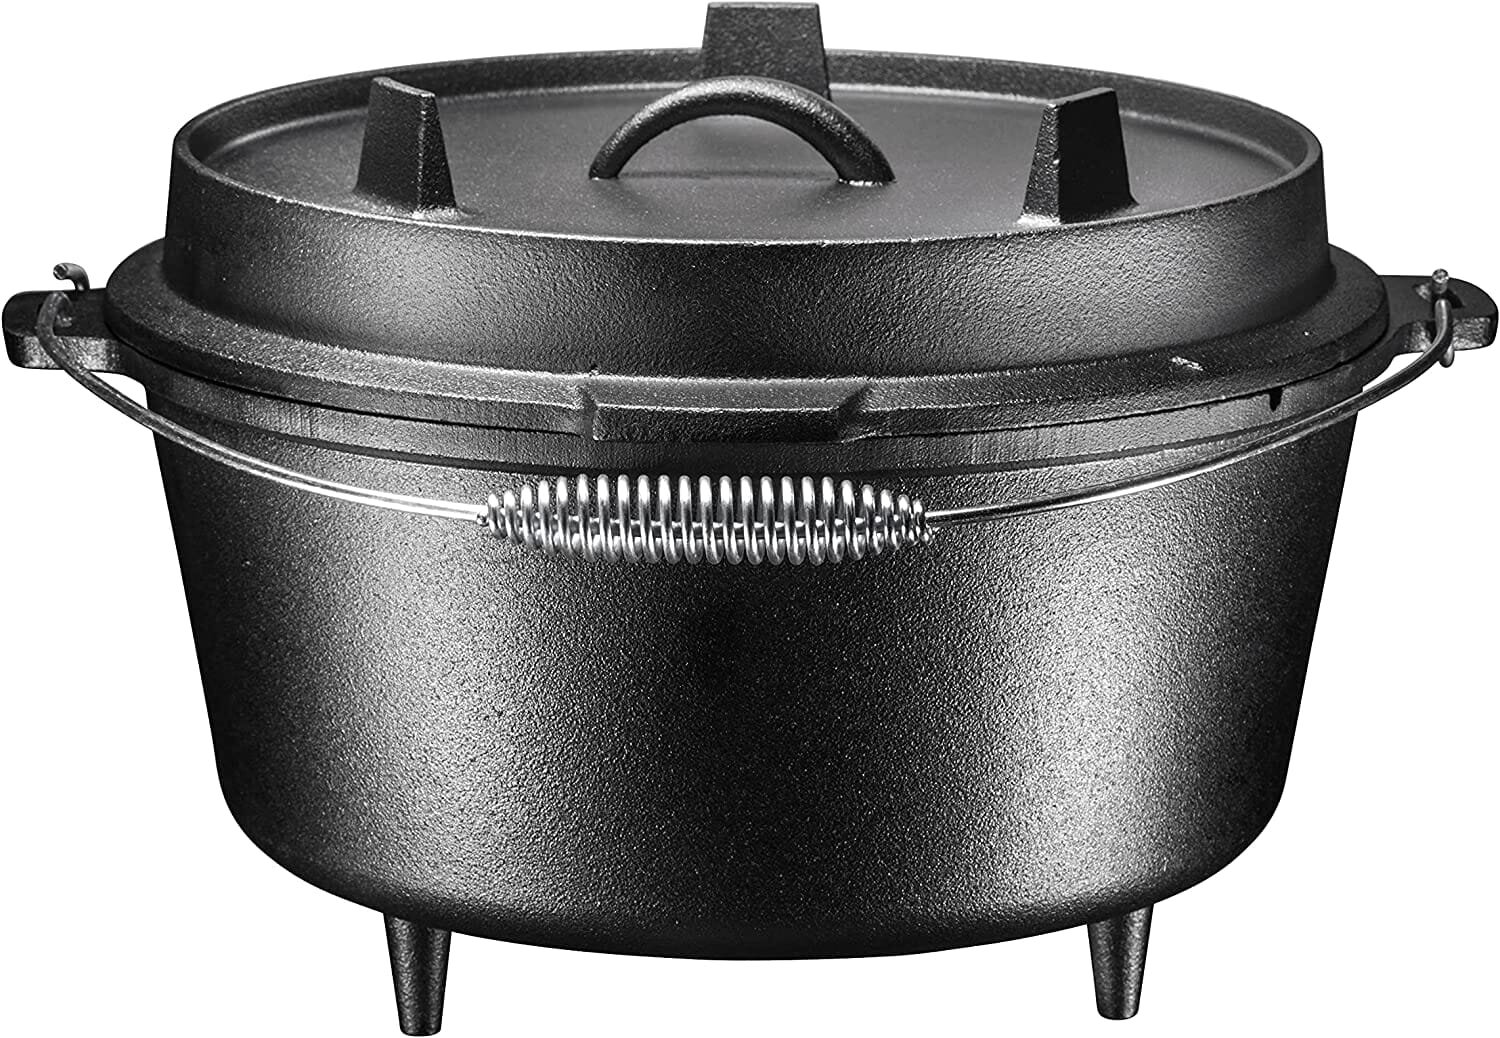 Bruntmor Pre-Seasoned All In 1 Cast Iron Camping Cookware Set